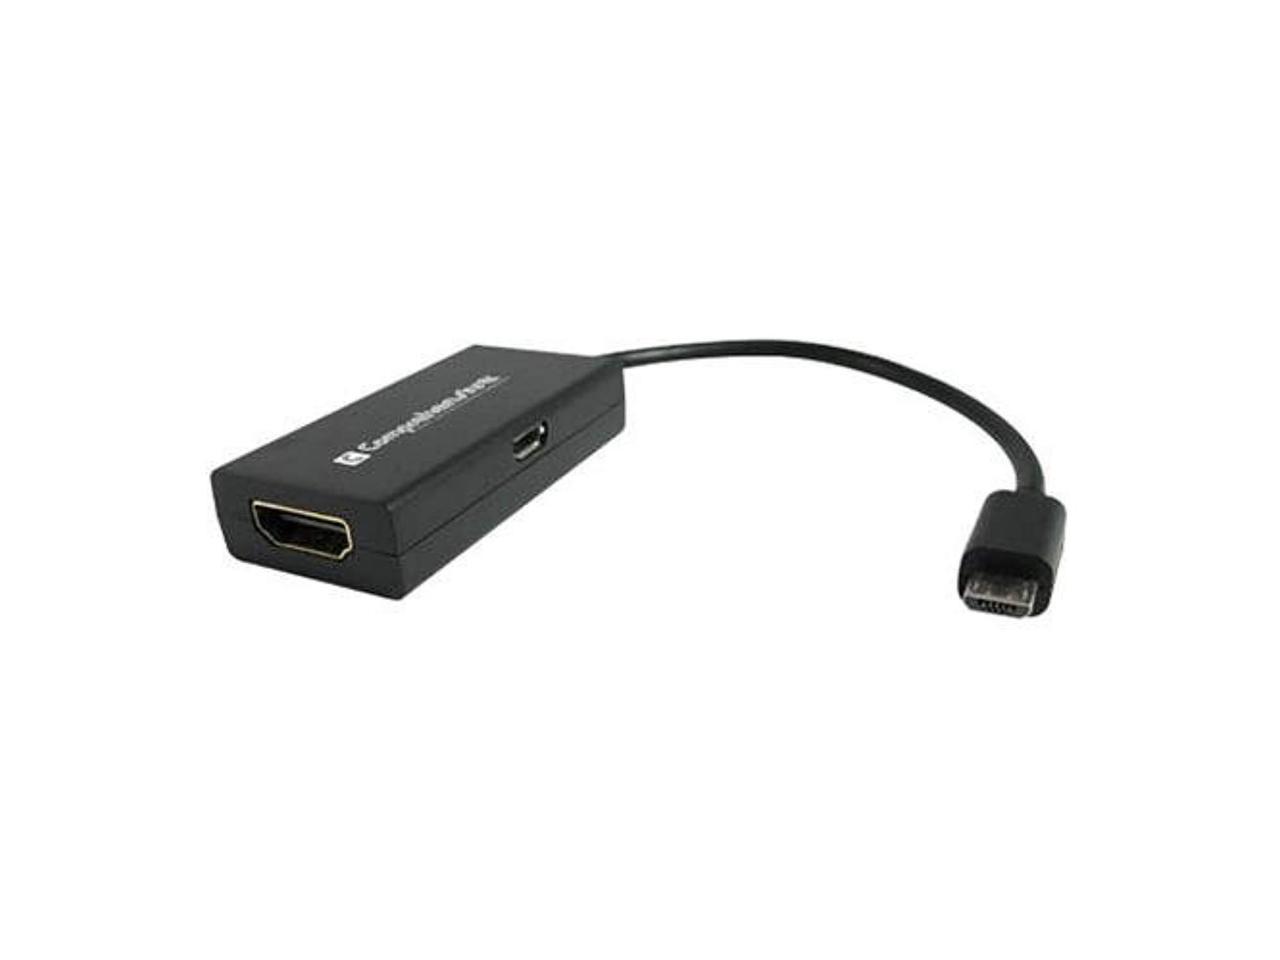 micro usb to hdmi converter box without mhl